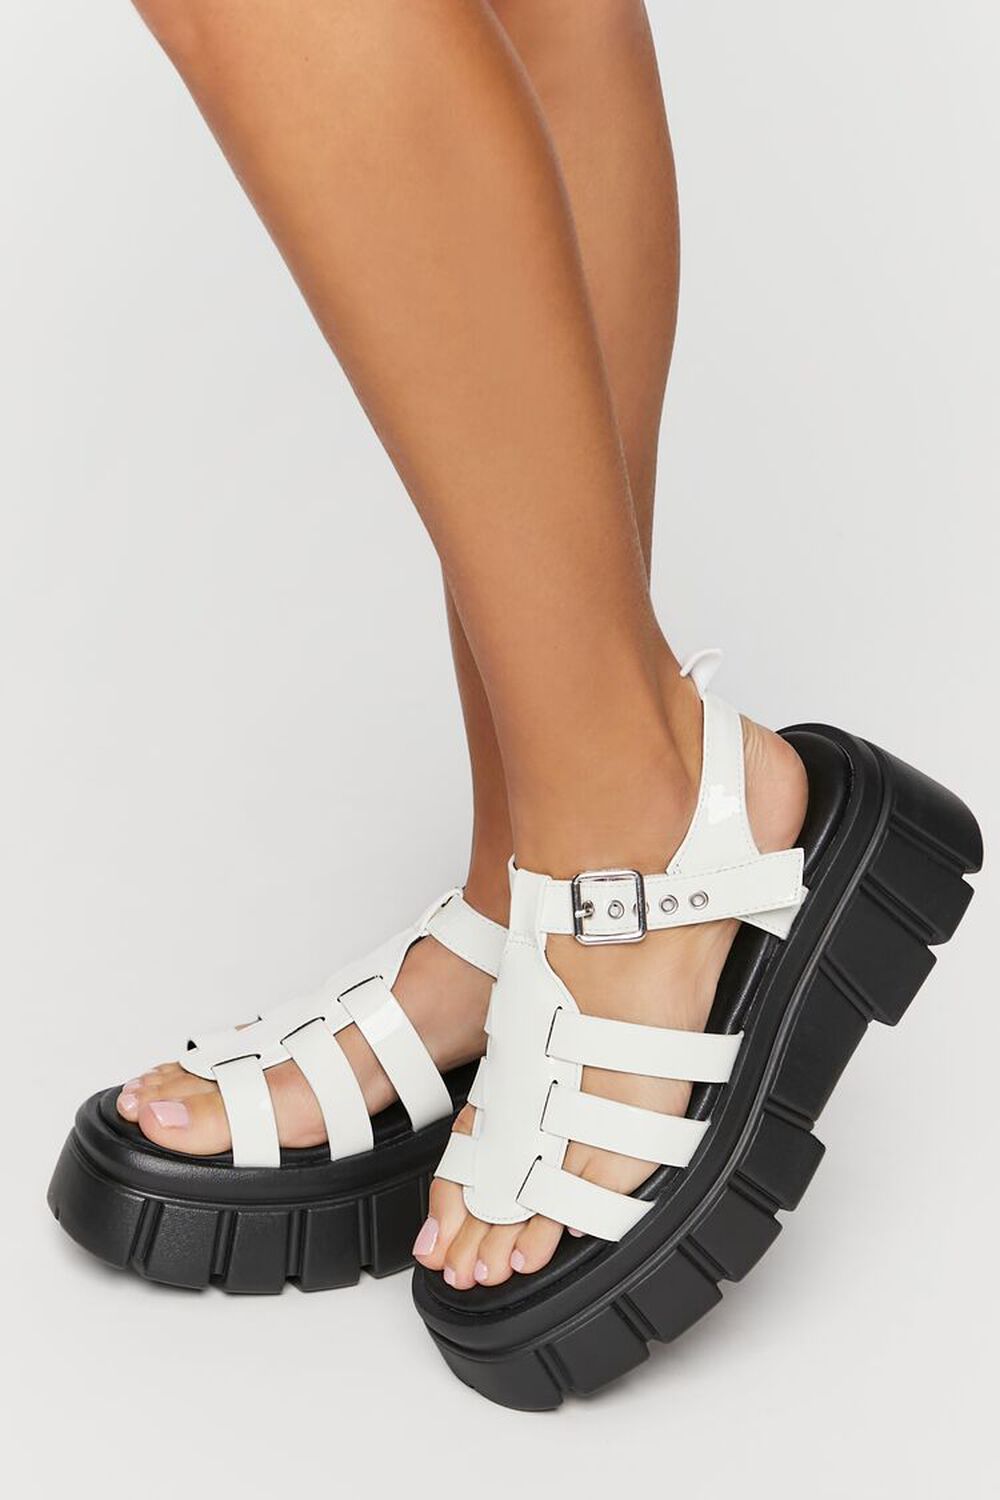 WHITE Faux Patent Leather Caged Lug-Sole Sandals, image 1